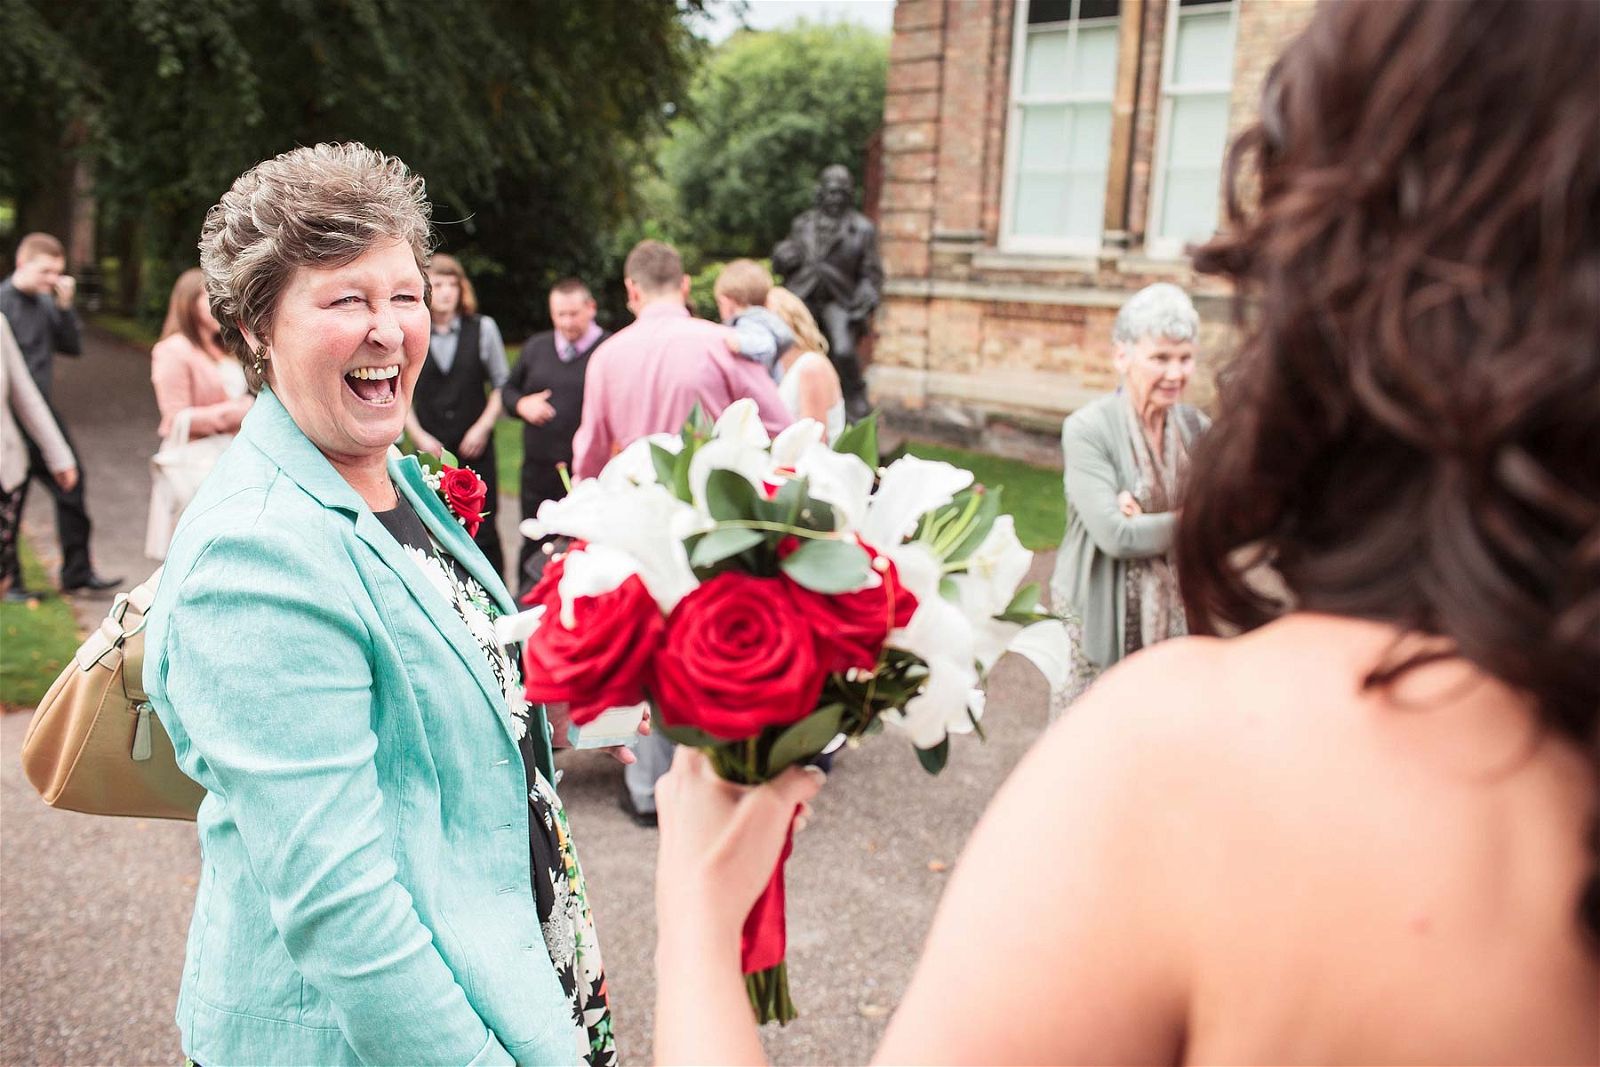 Relaxed natural wedding photographs at Lichfield Registry Office in Lichfield by Staffordshire Wedding Photographer Stuart James